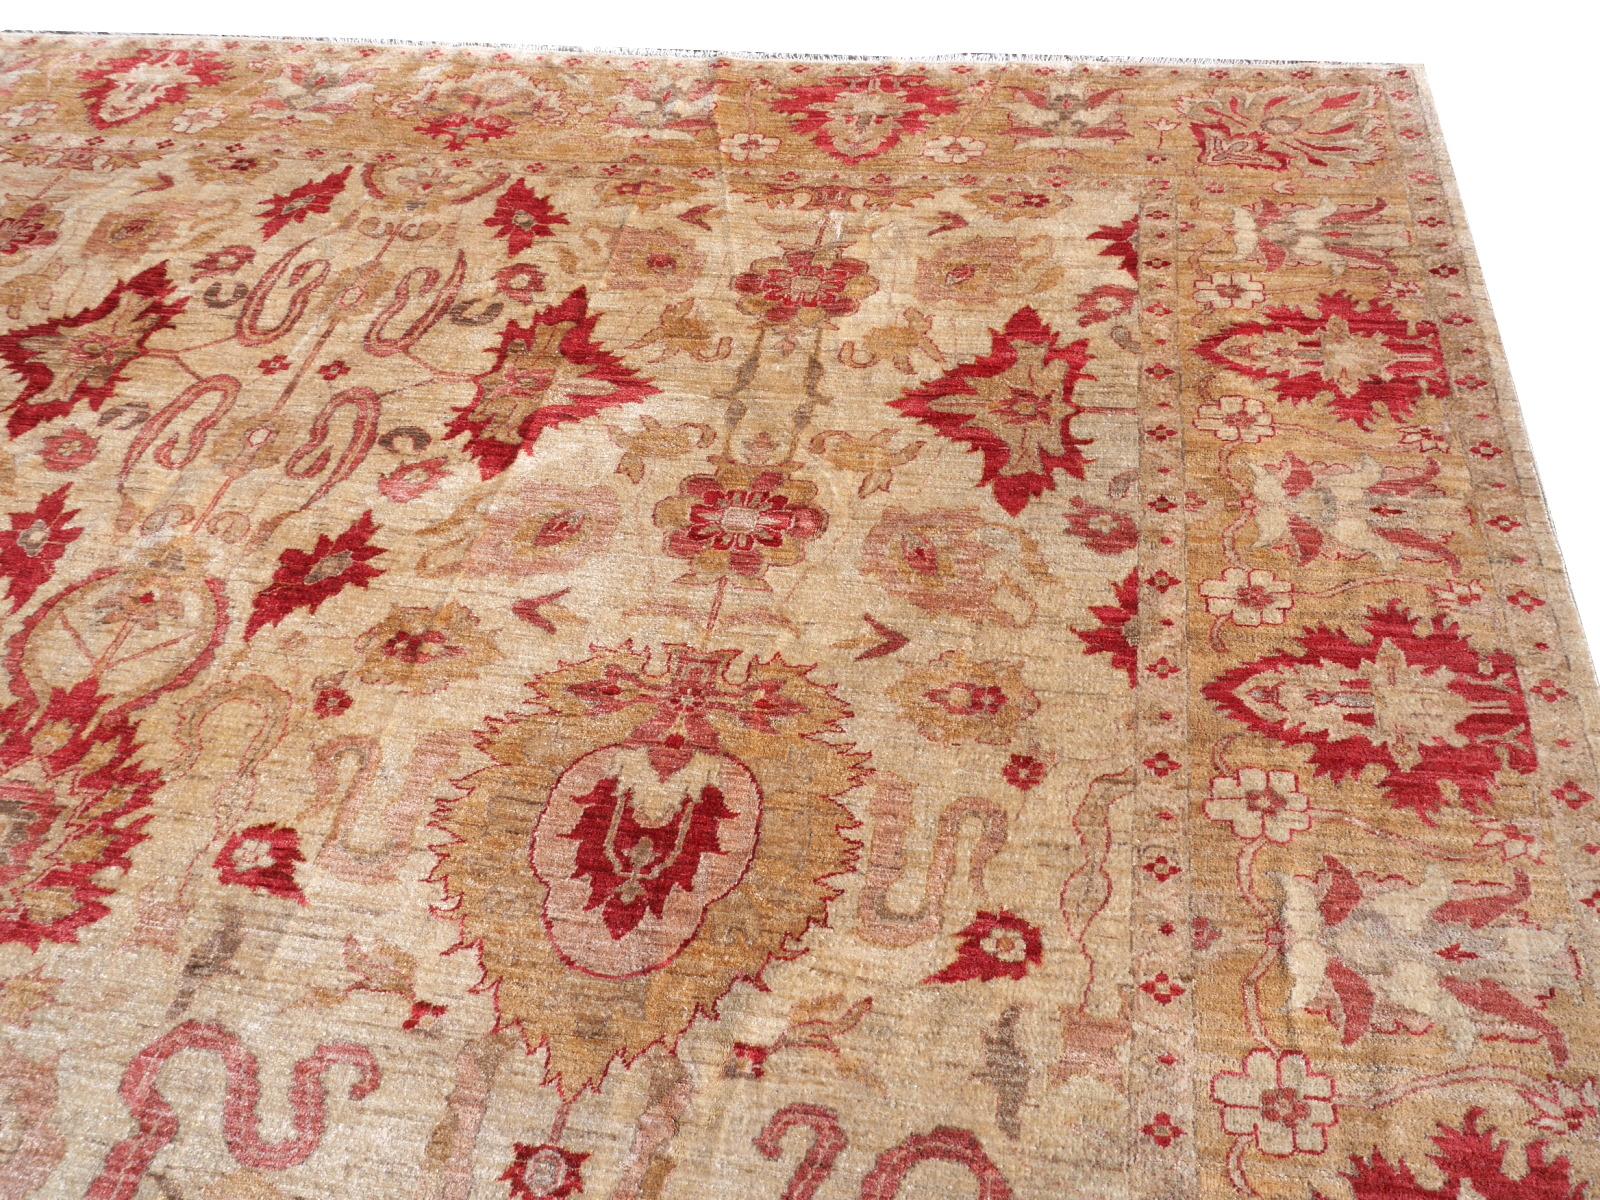 Wool 18 x 13 ft Rug in Style of Farahan Ziegler Oversized Hand-Knotted 550 x 400 cm For Sale